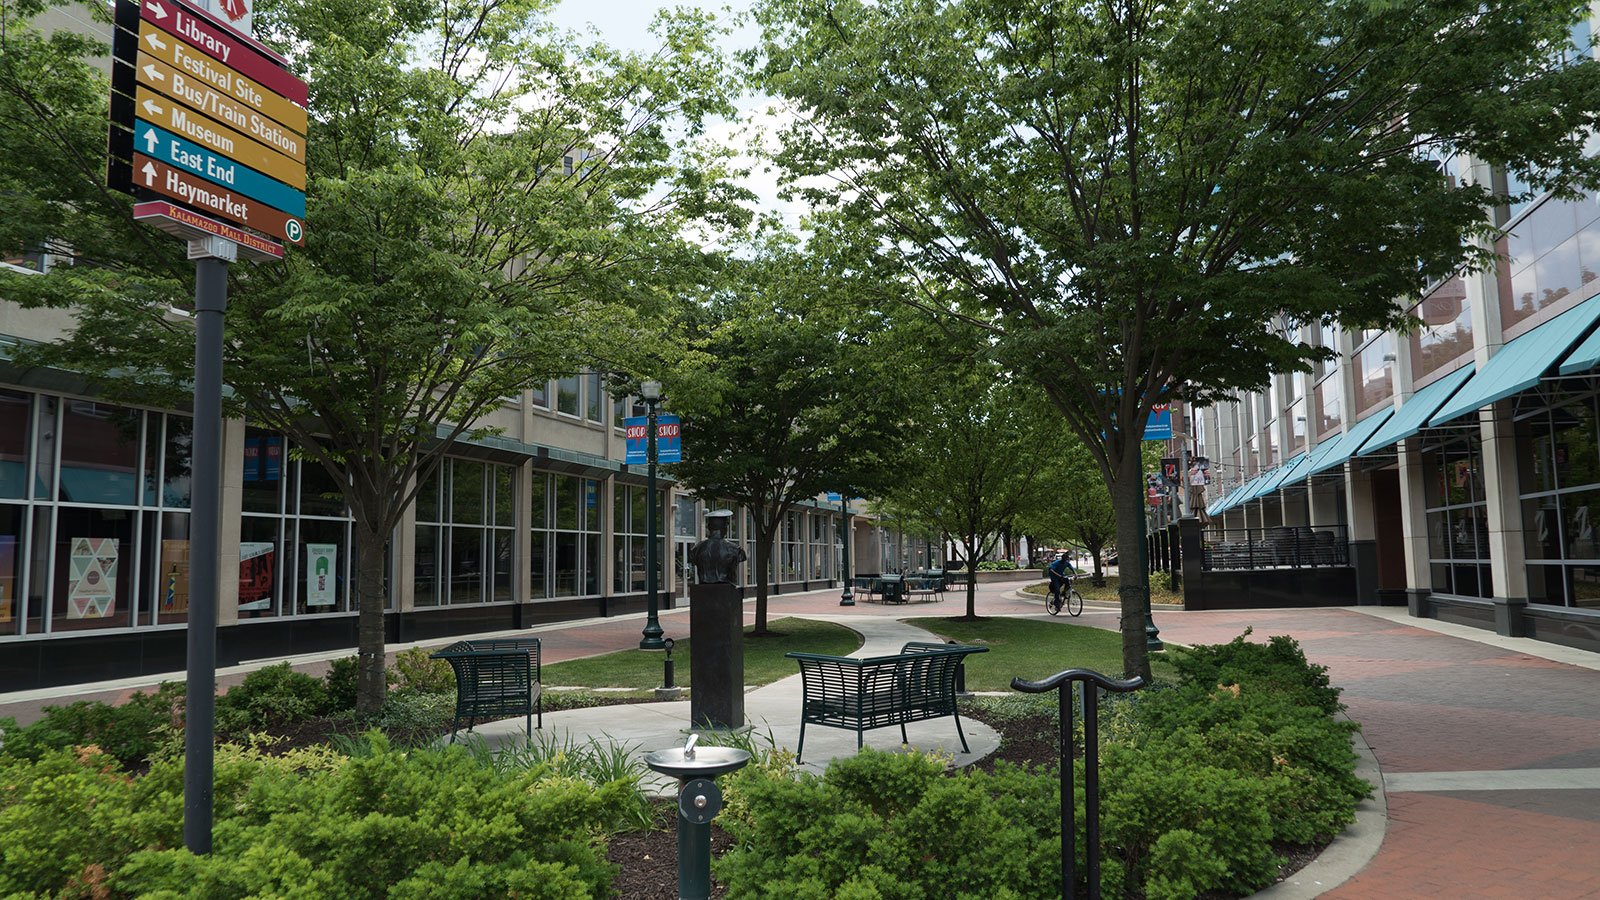 The north end of the Kalamazoo Mall in 2017